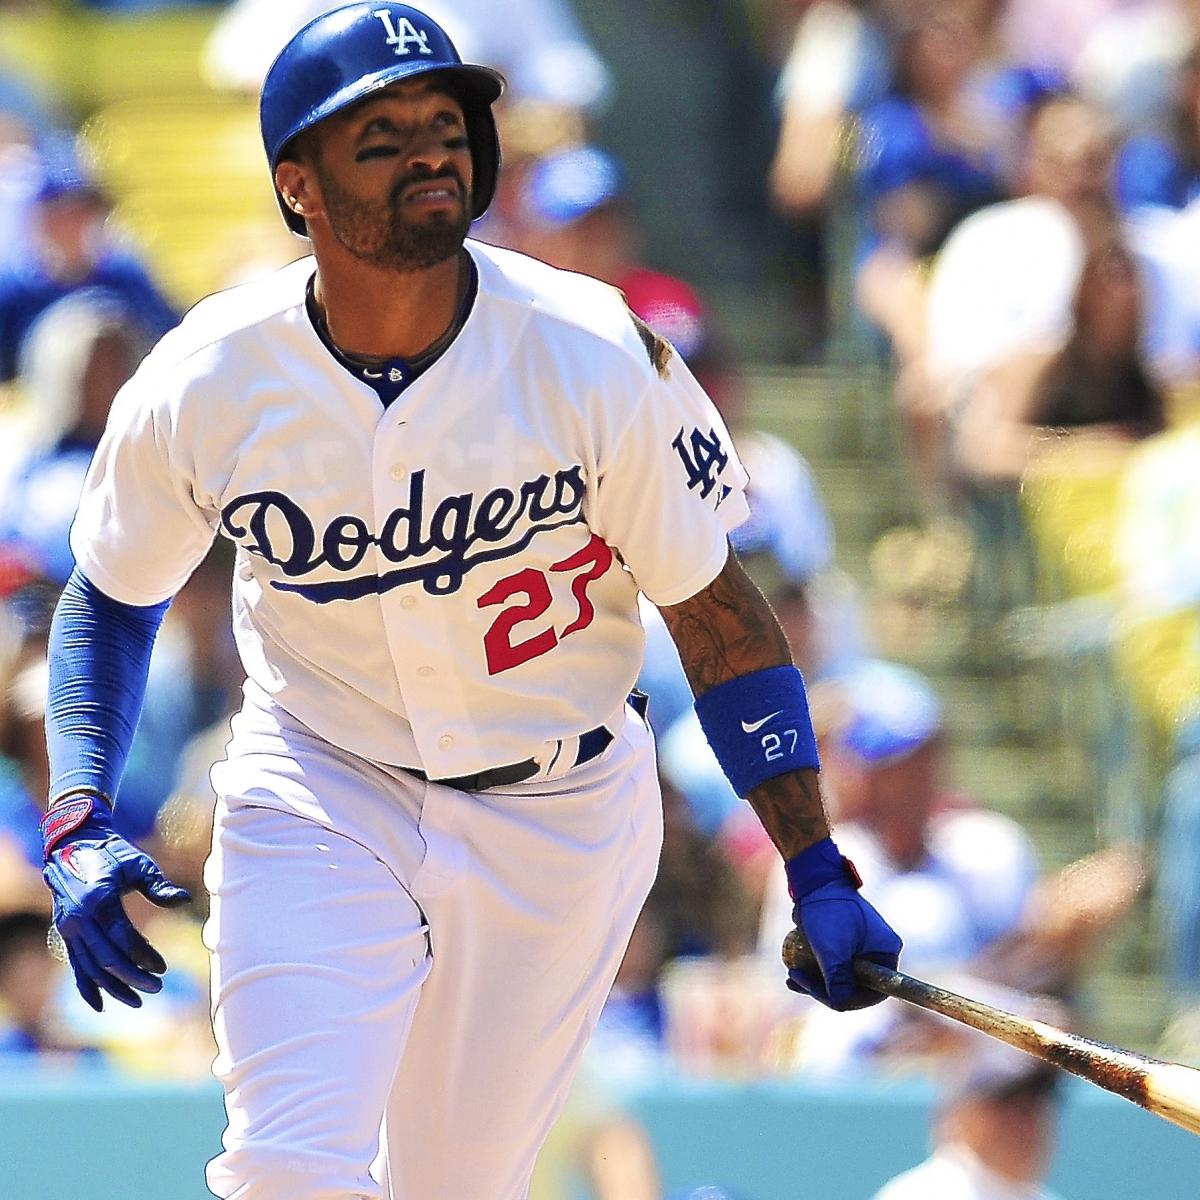 Matt Kemp has officially been traded to the Padres - NBC Sports